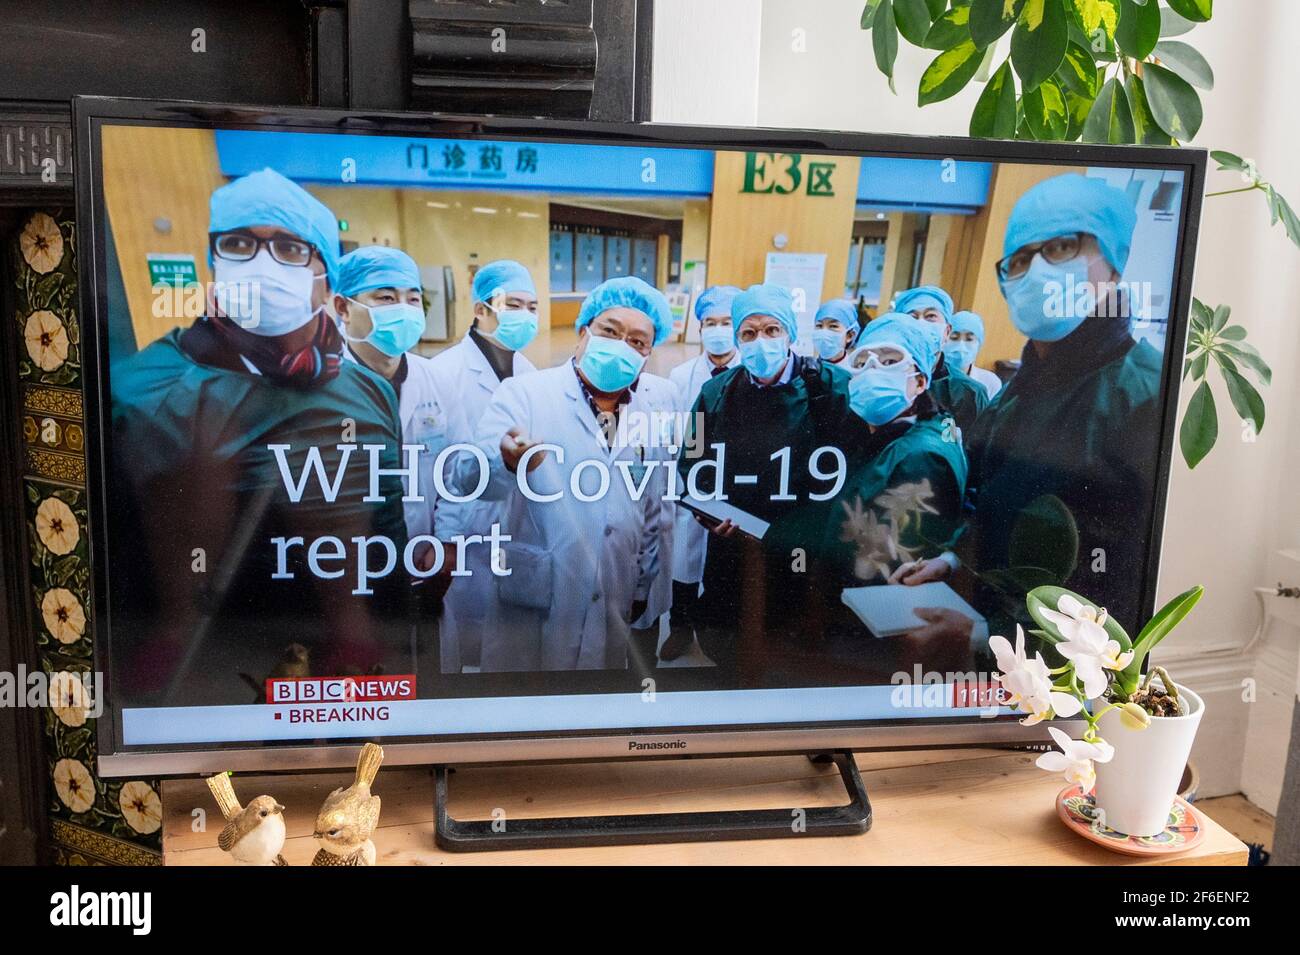 Televised news of the release of a World Health Organisation report on Covid-19 Stock Photo